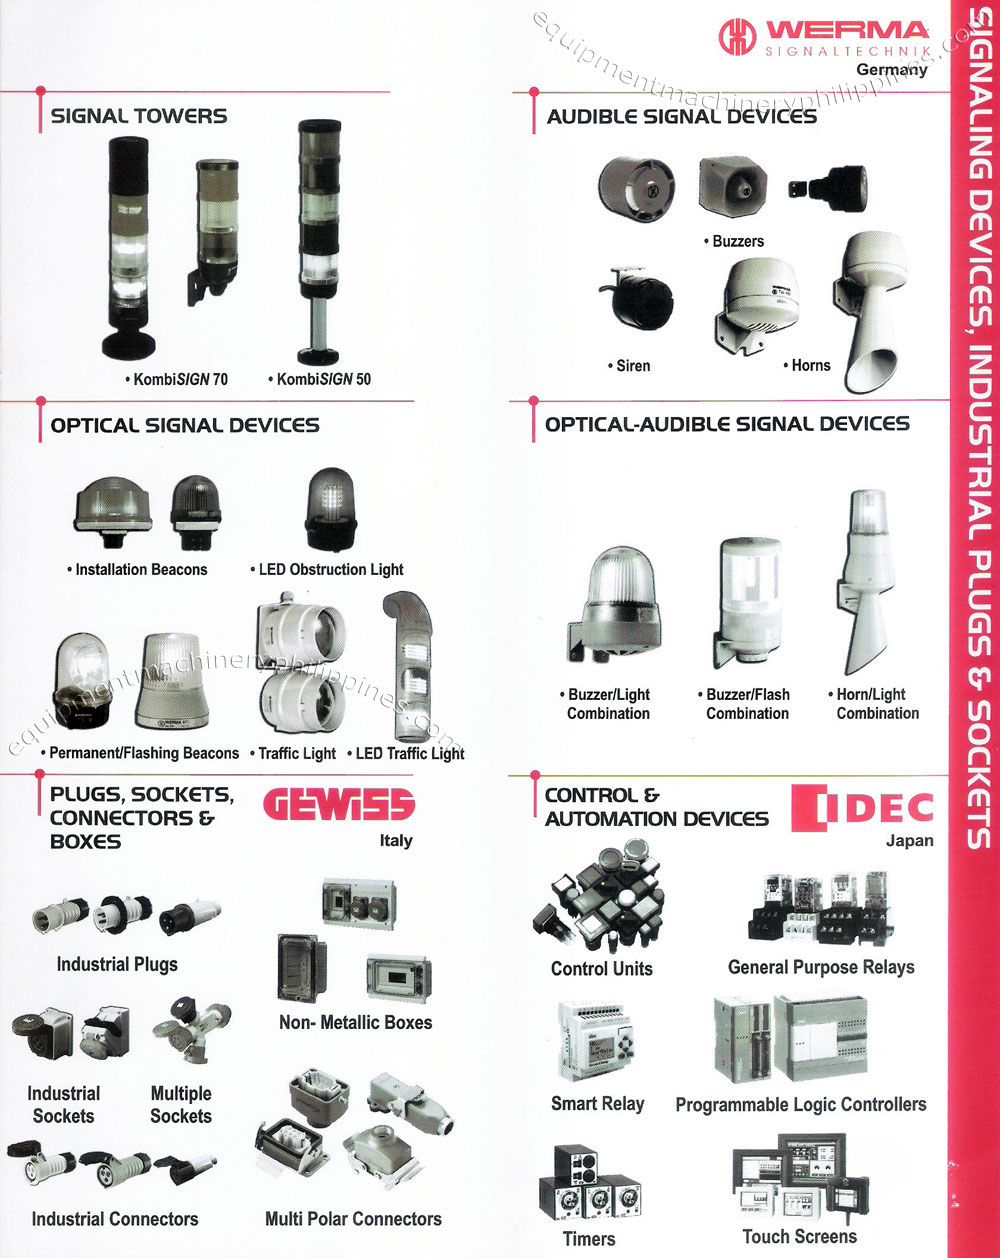 Werma Signal Towers, Audible Signal Devices, Optical Signal Devices; Gewiss Plugs, Sockets, Connectors and Boxes; Idec Control and Automation Devices